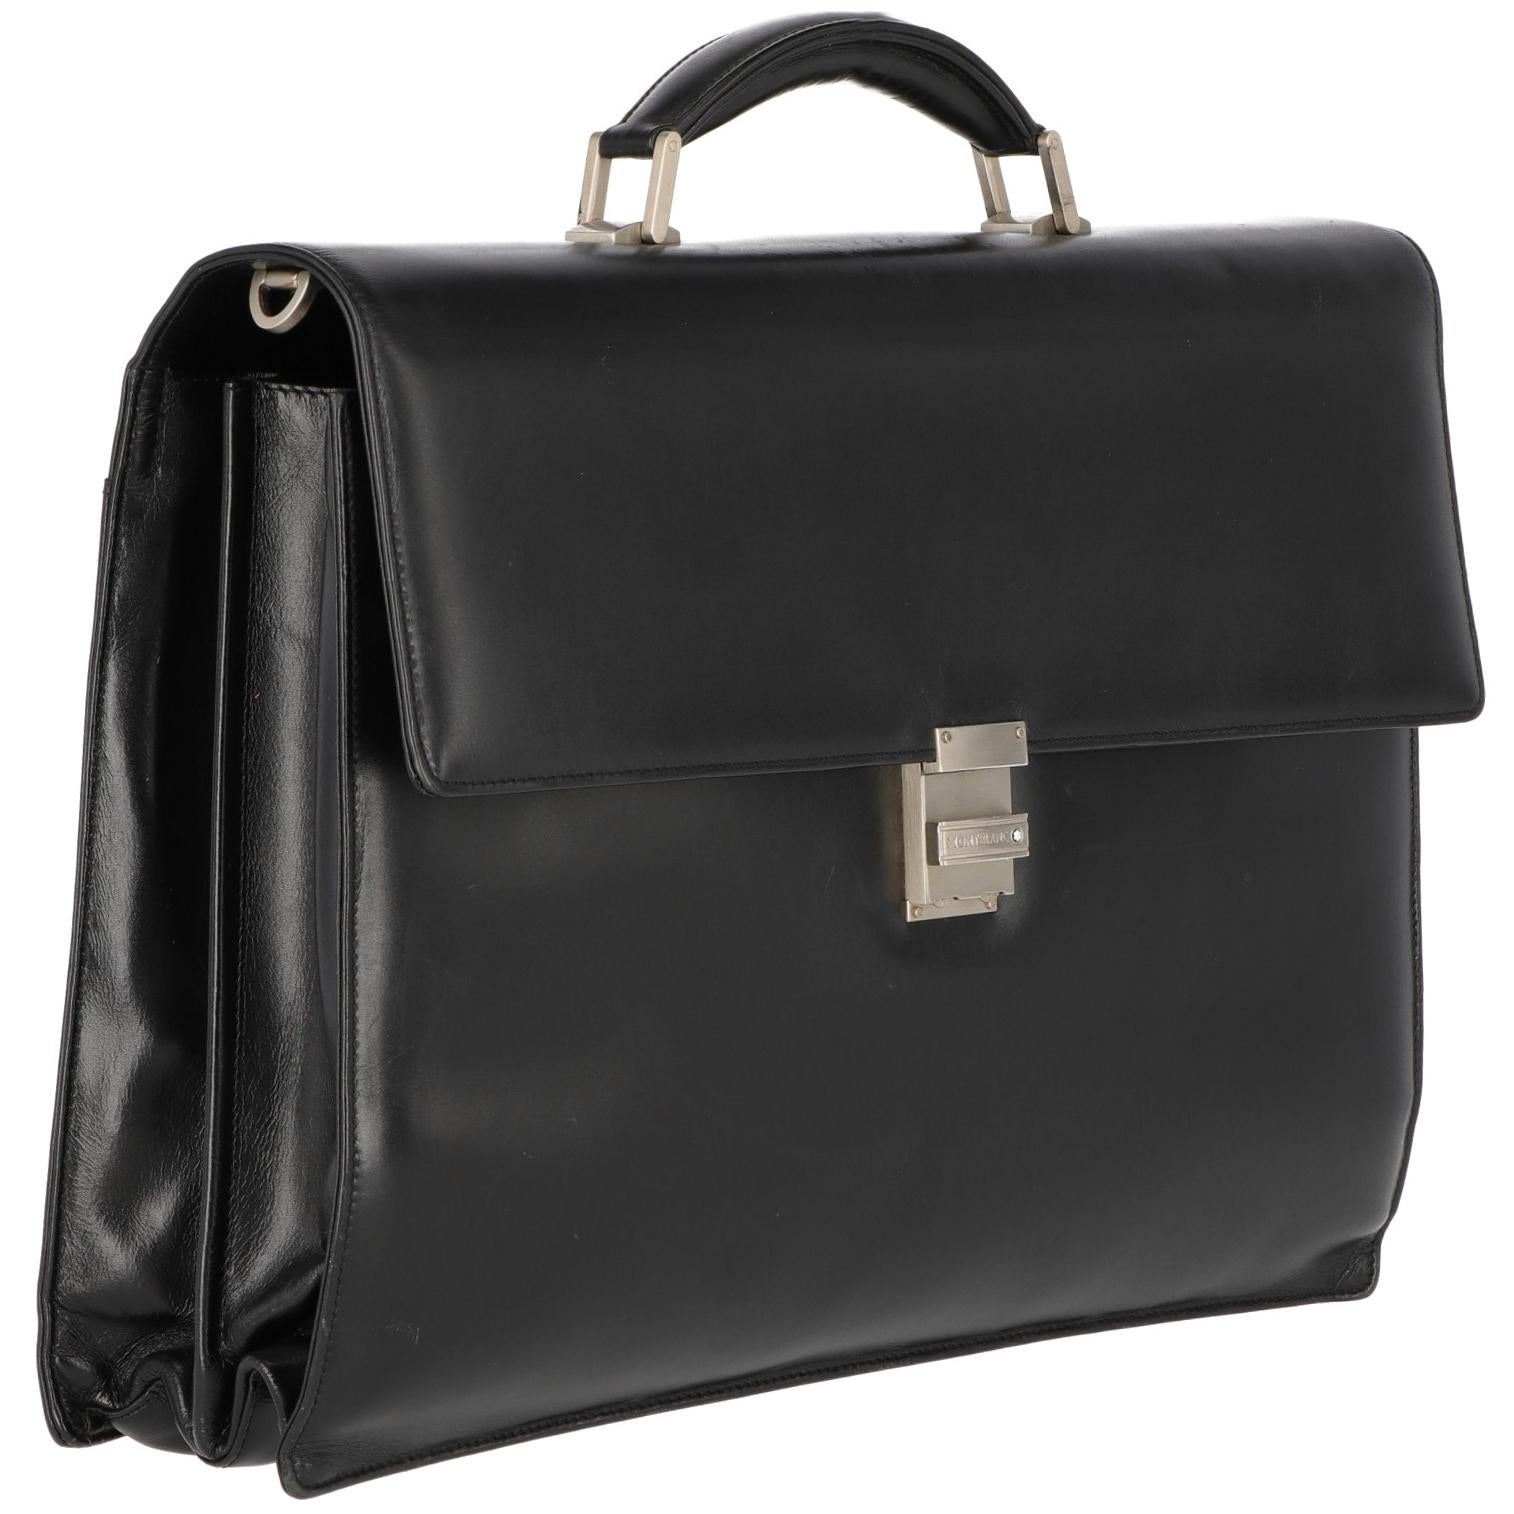 The elegant Montblanc briefcase is from the sophisticated Meisterstuck 1990s collection. In fullgrain calfskin leather, it features ousider and inner pockets and embellished by silver-ton metal details and buckles. Front closure  with combination